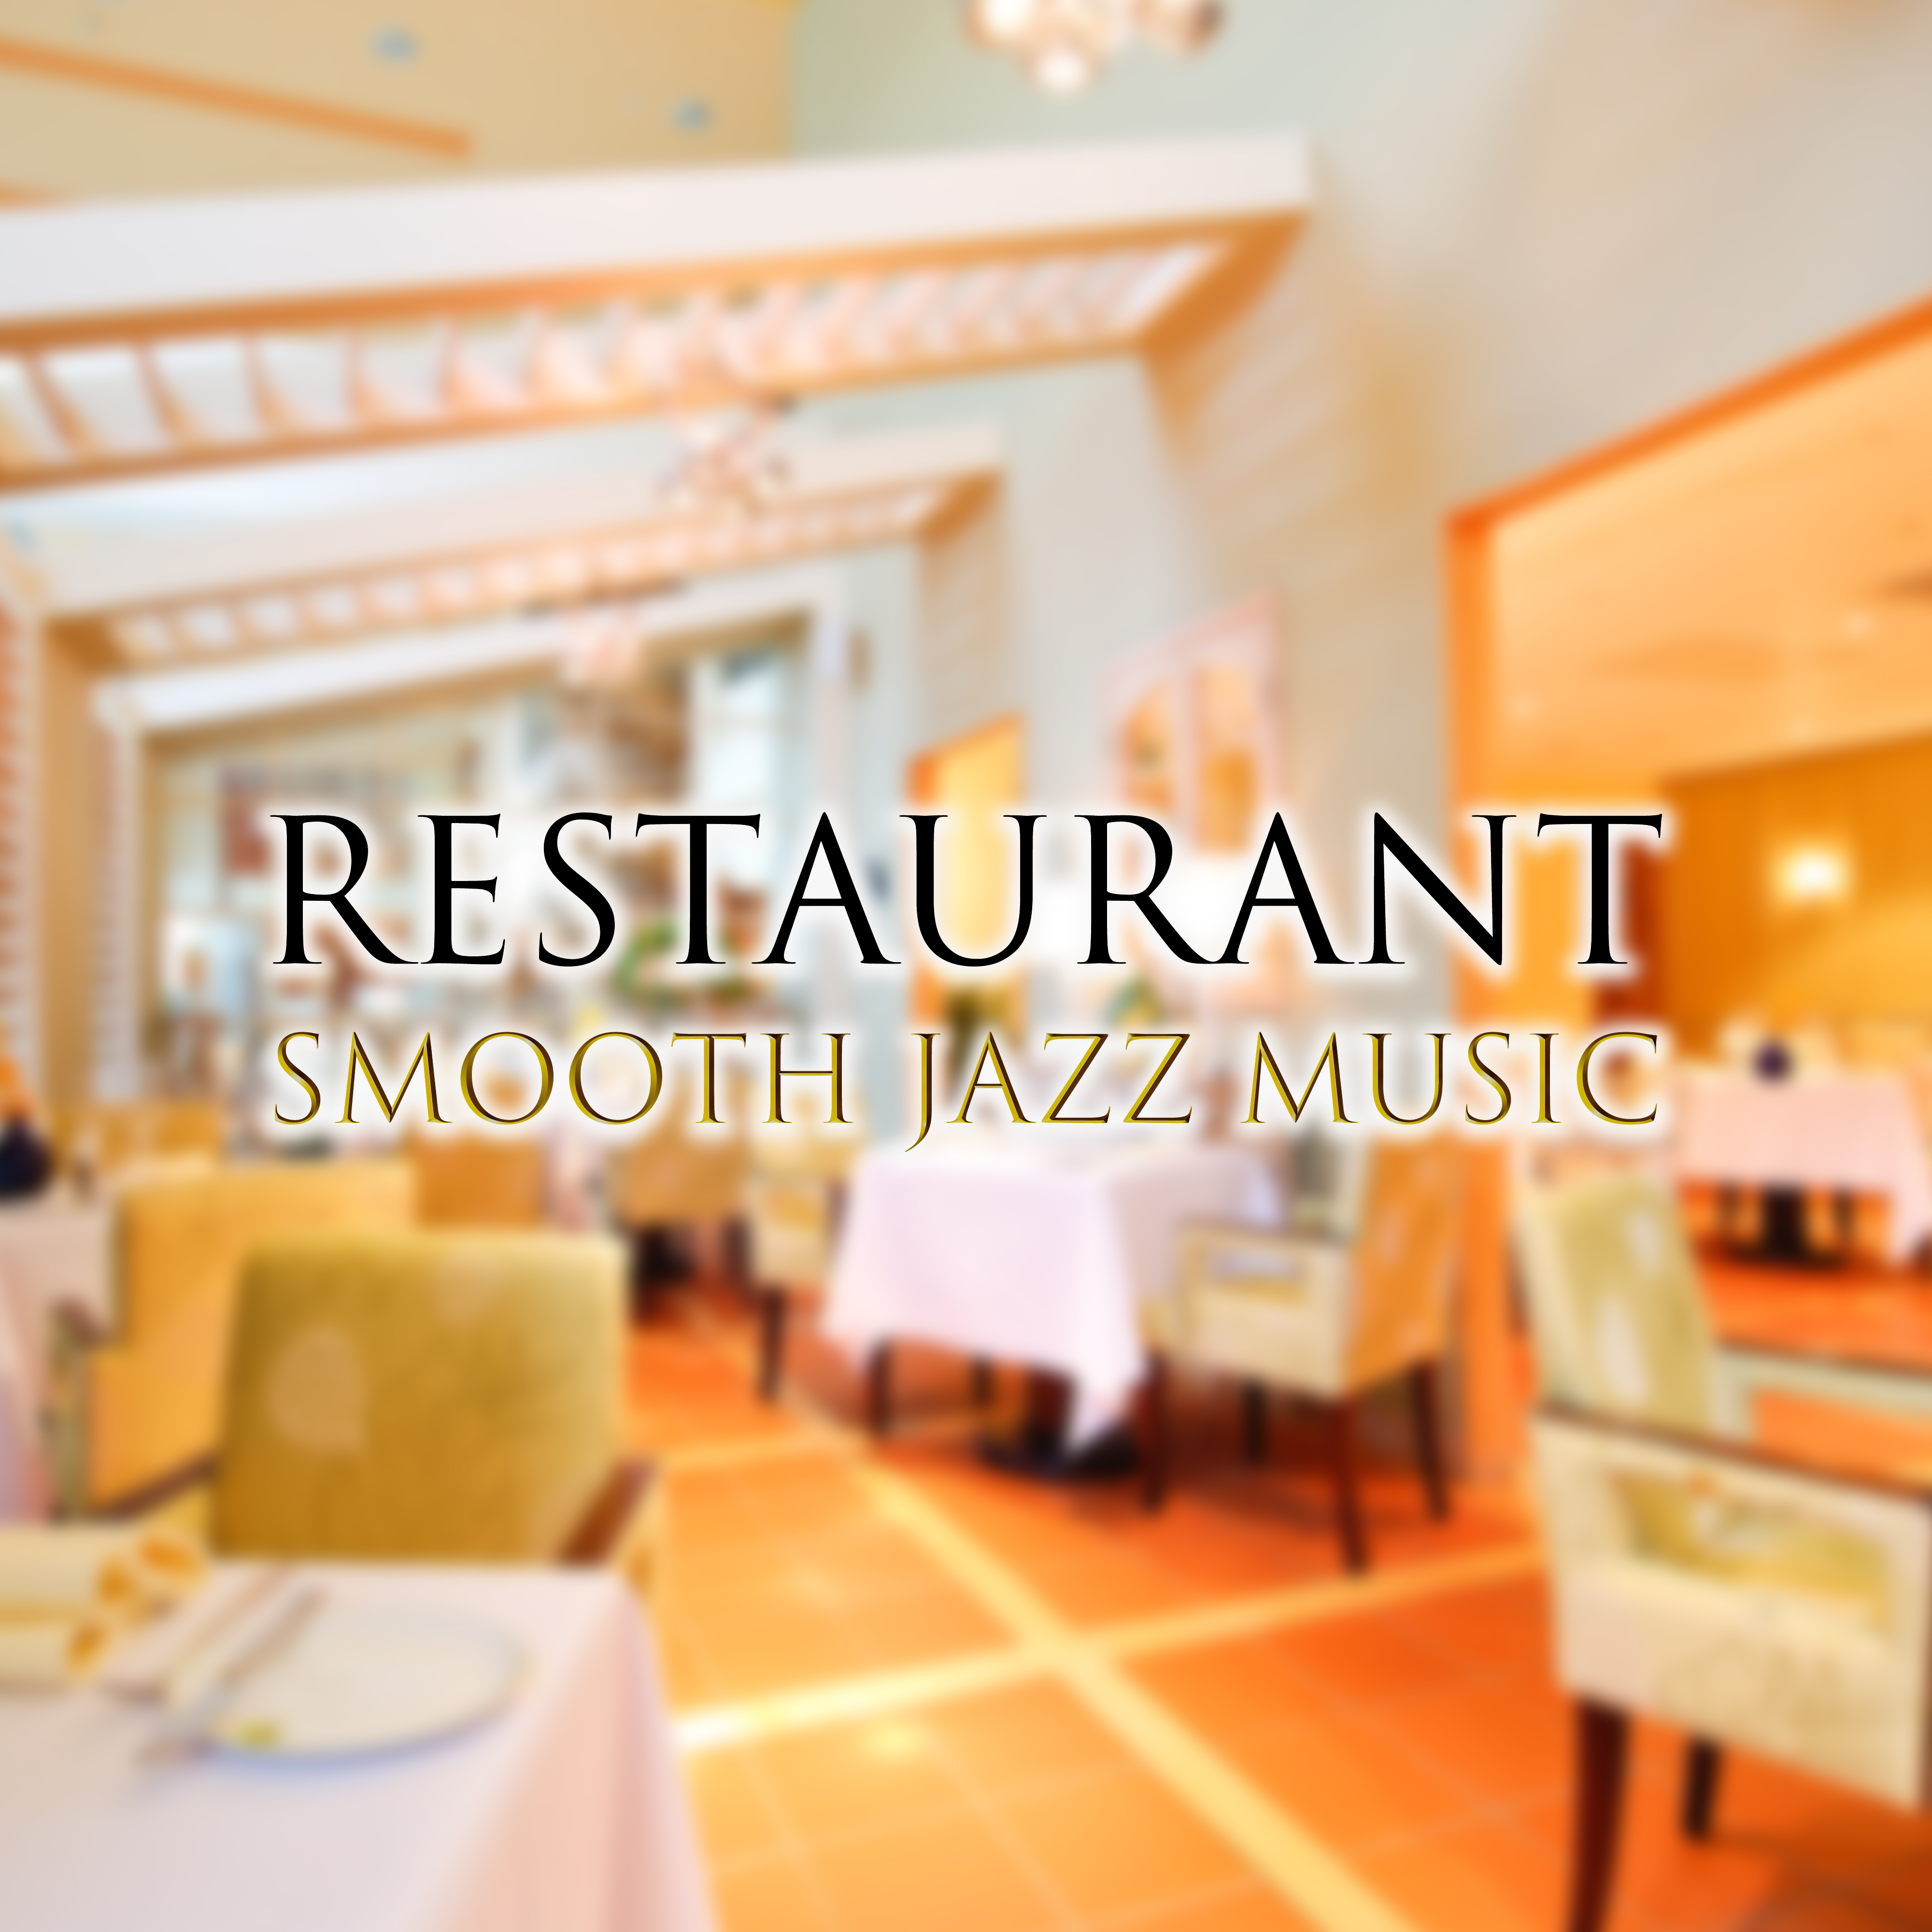 Restaurant Smooth Jazz Music  Calming Piano Jazz, Smooth Sounds, Mellow Music, Best Background Jazz, Easy Listening